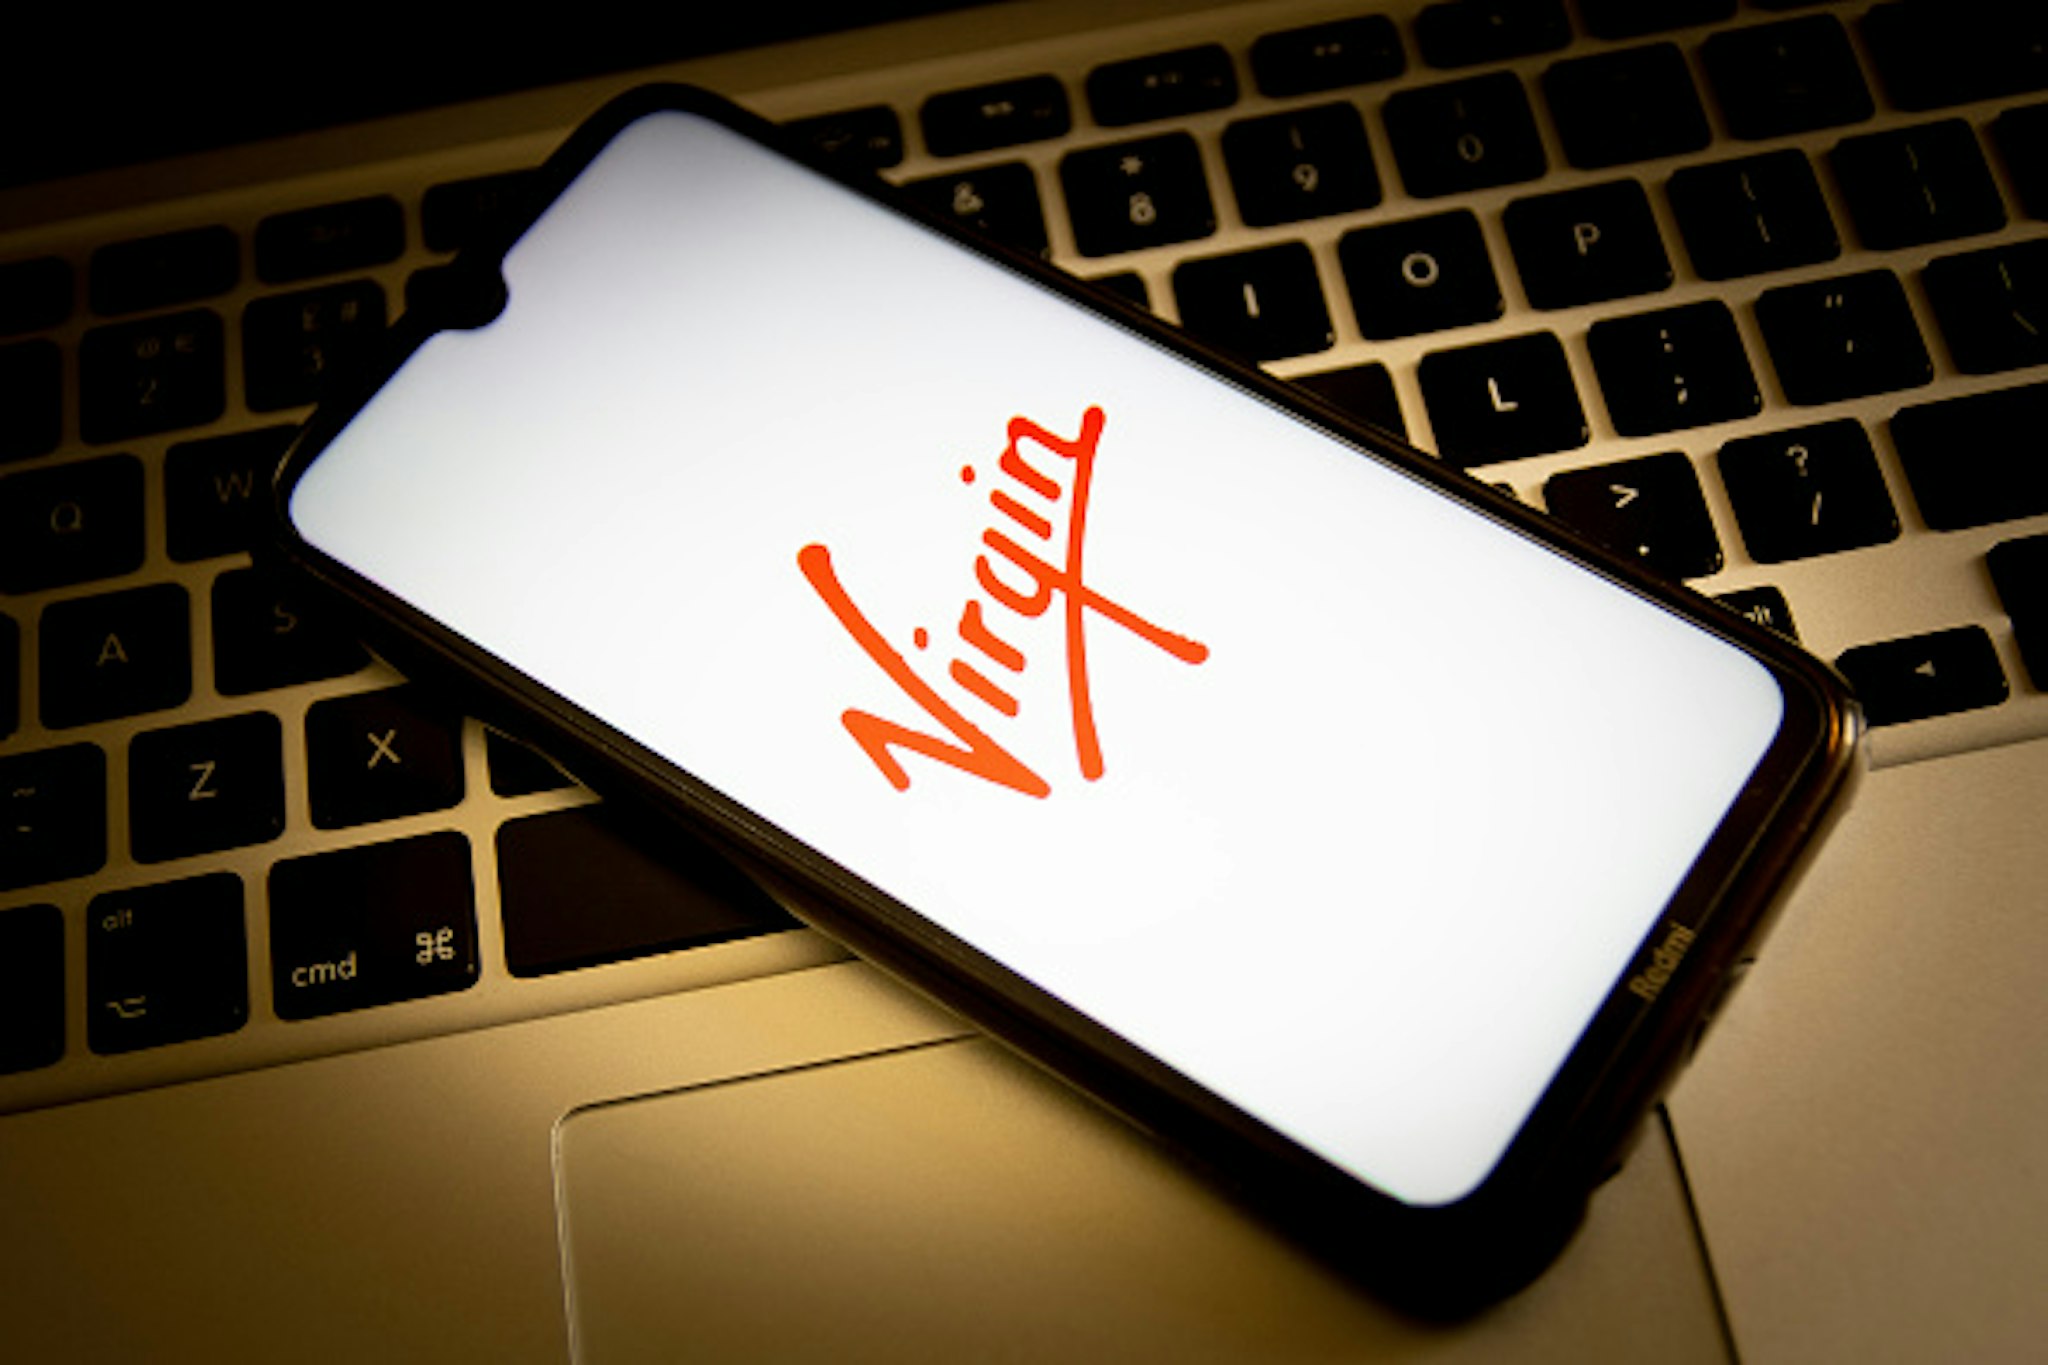 GREECE - 2021/04/23: In this photo illustration, a Virgin logo seen displayed on a smartphone screen with a computer keyboard in the background.